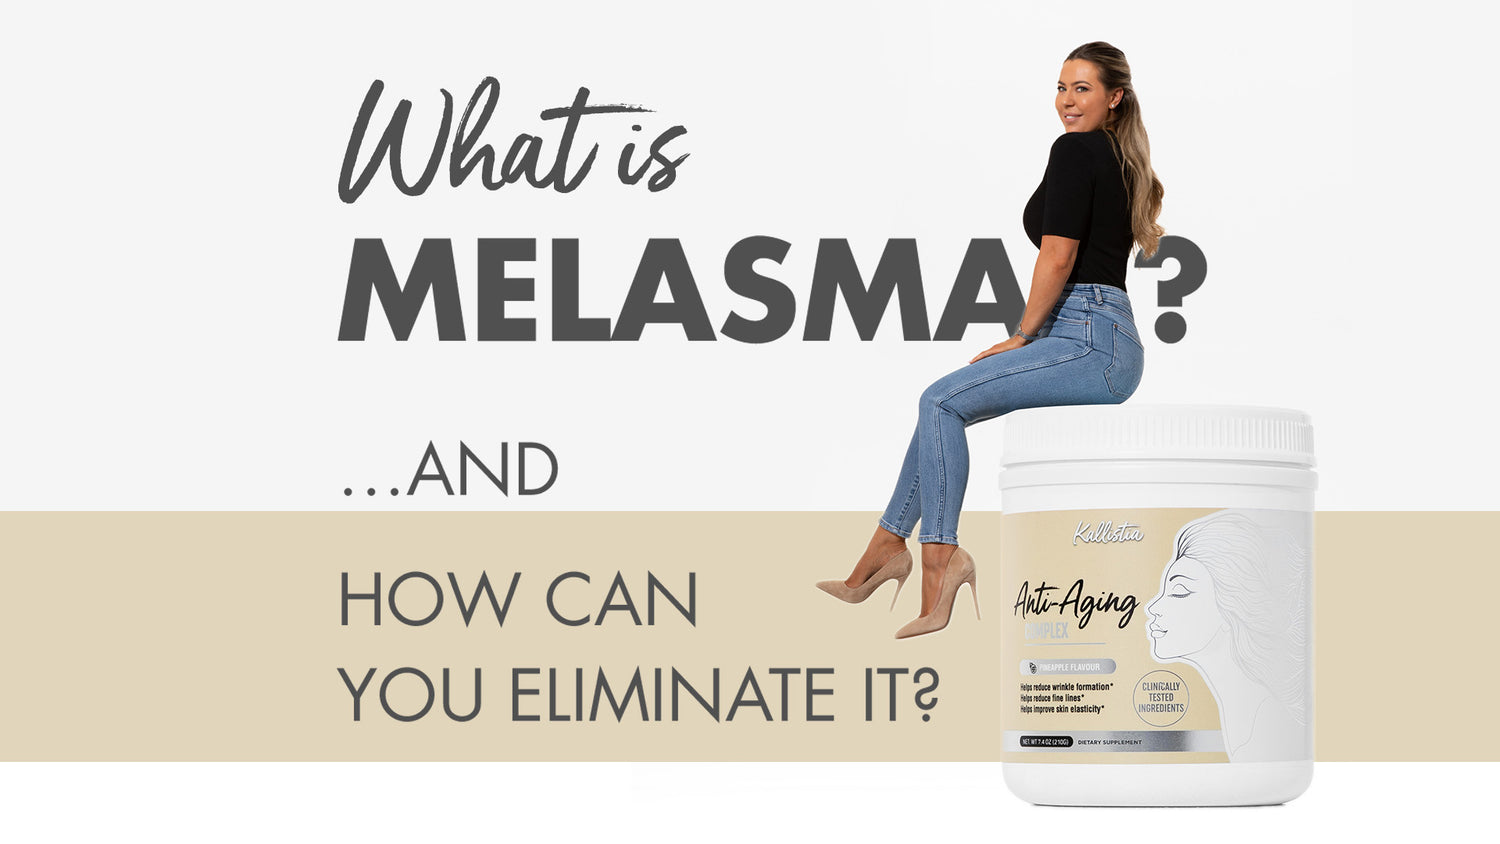 What is melasma? …and how can you eliminate it?